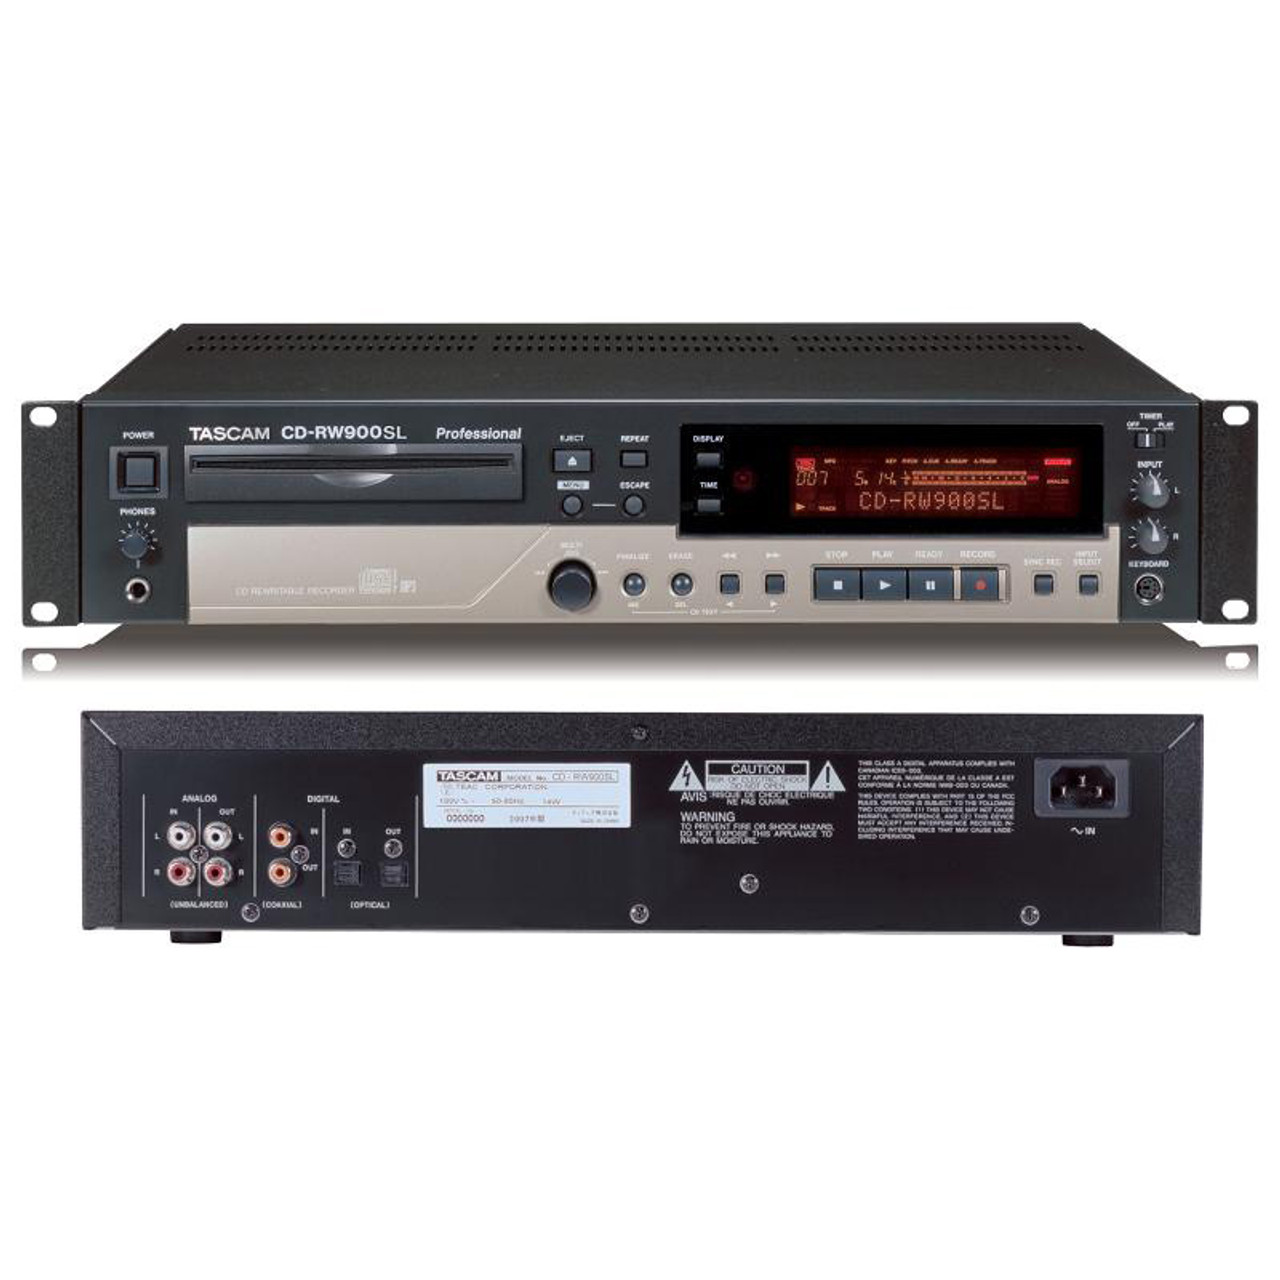 Tascam CD-RW900SL CD Recorder | One Of The Most Popular CD